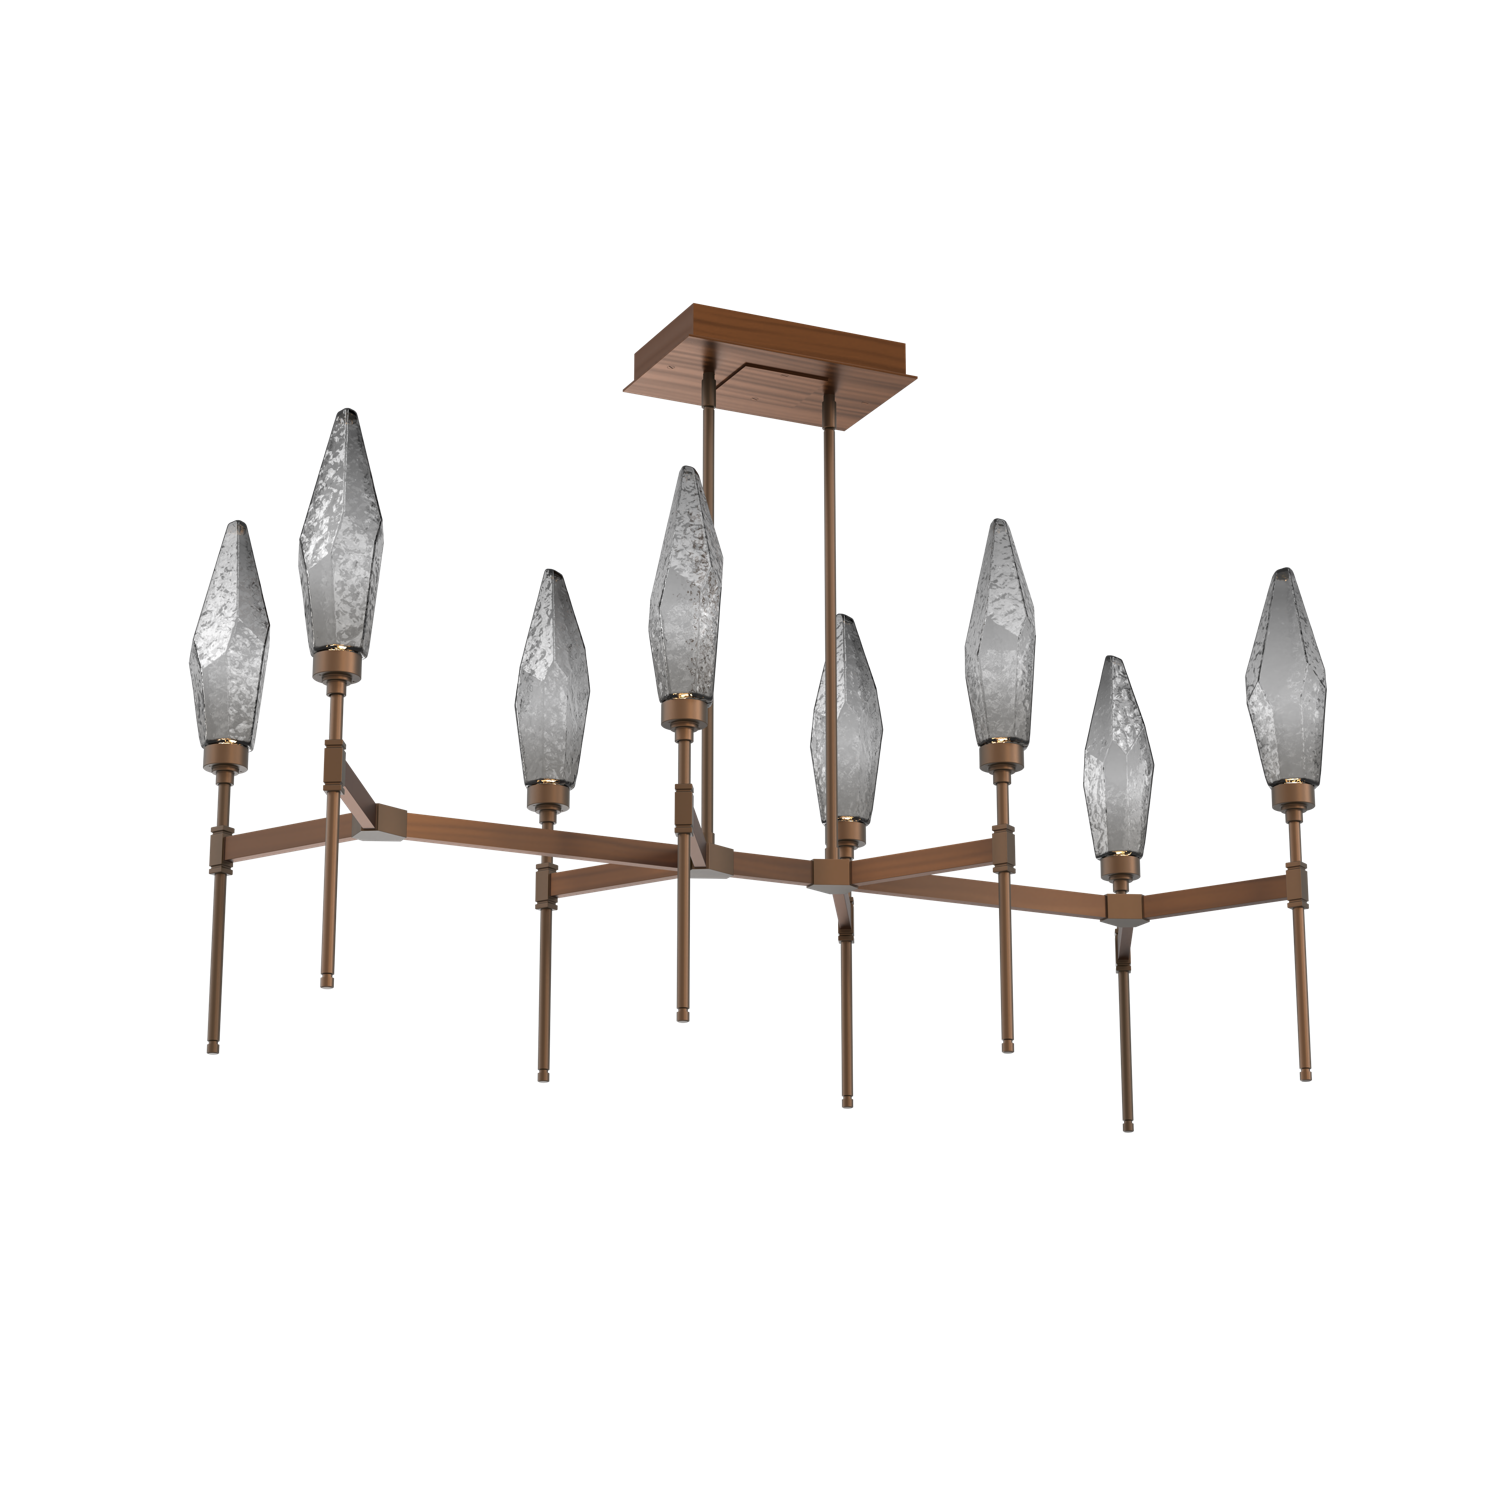 PLB0050-48-RB-CS-Hammerton-Studio-Rock-Crystal-48-inch-linear-belvedere-chandelier-with-oil-rubbed-bronze-finish-and-chilled-smoke-glass-shades-and-LED-lamping